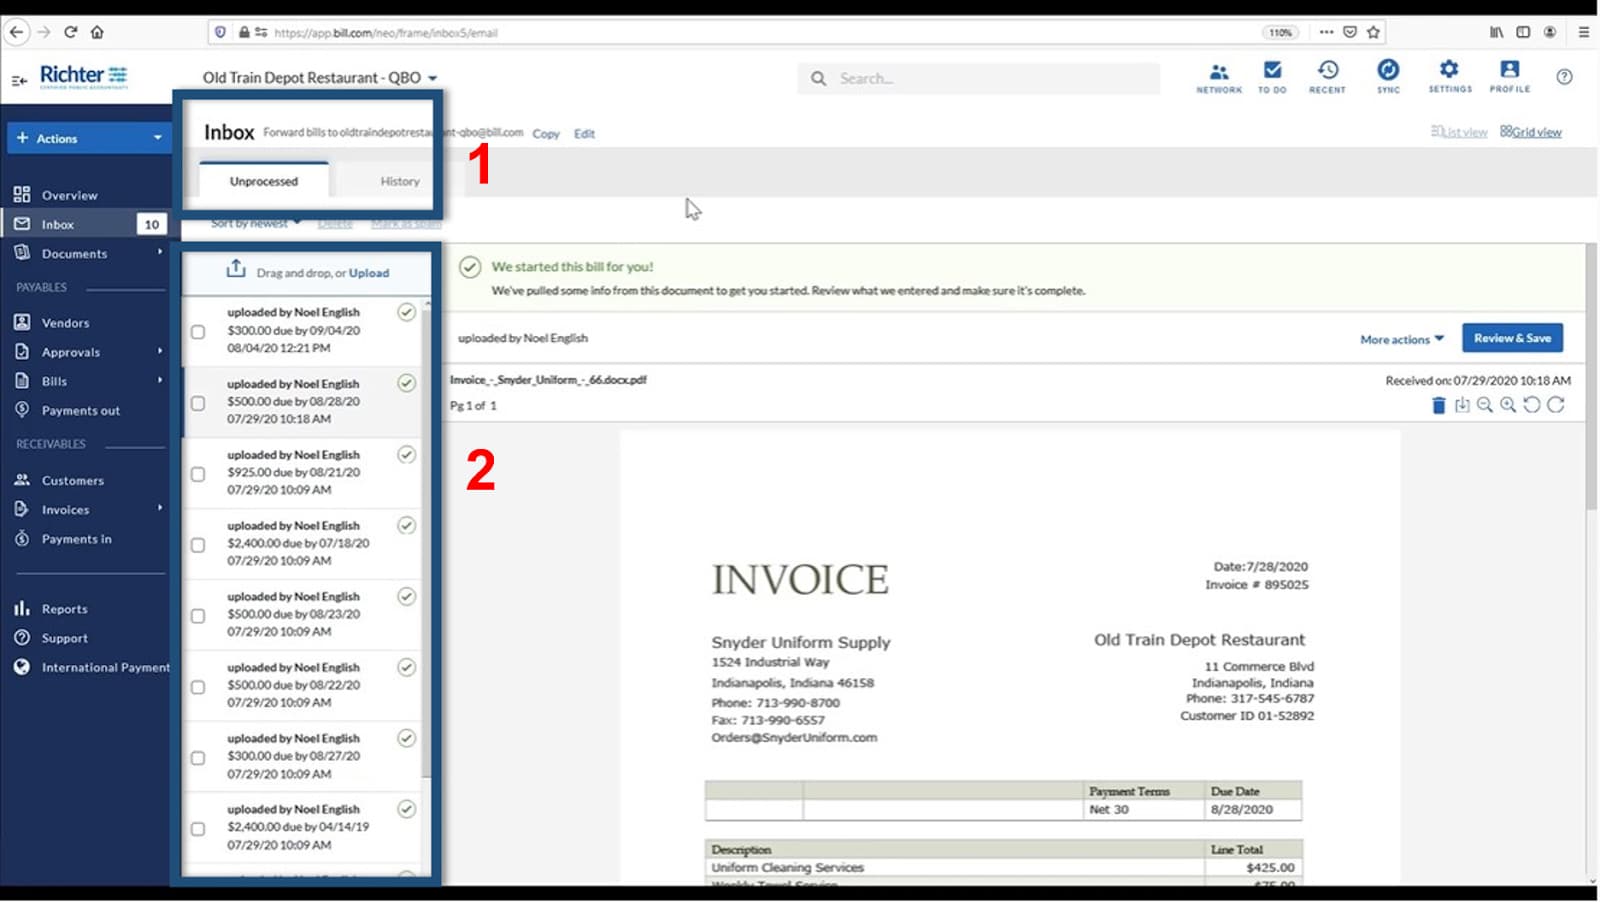 Image showing the inbox window of BILL.